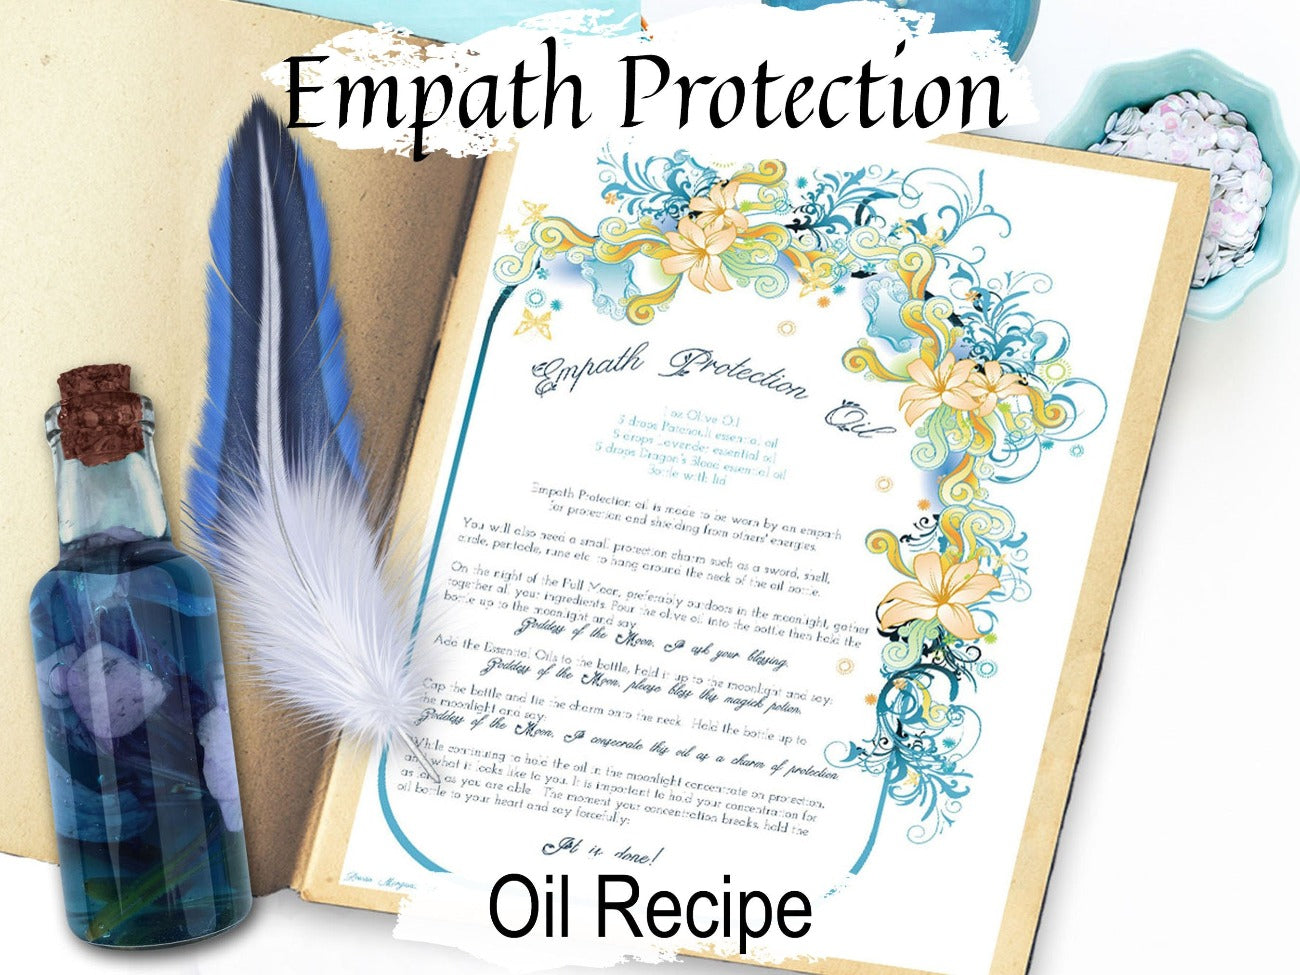 EMPATH PROTECTION OIL, hypersensitivity, protection oil blend, balance negative energy, protective shield, printable recipe, well-being - Morgana Magick Spell